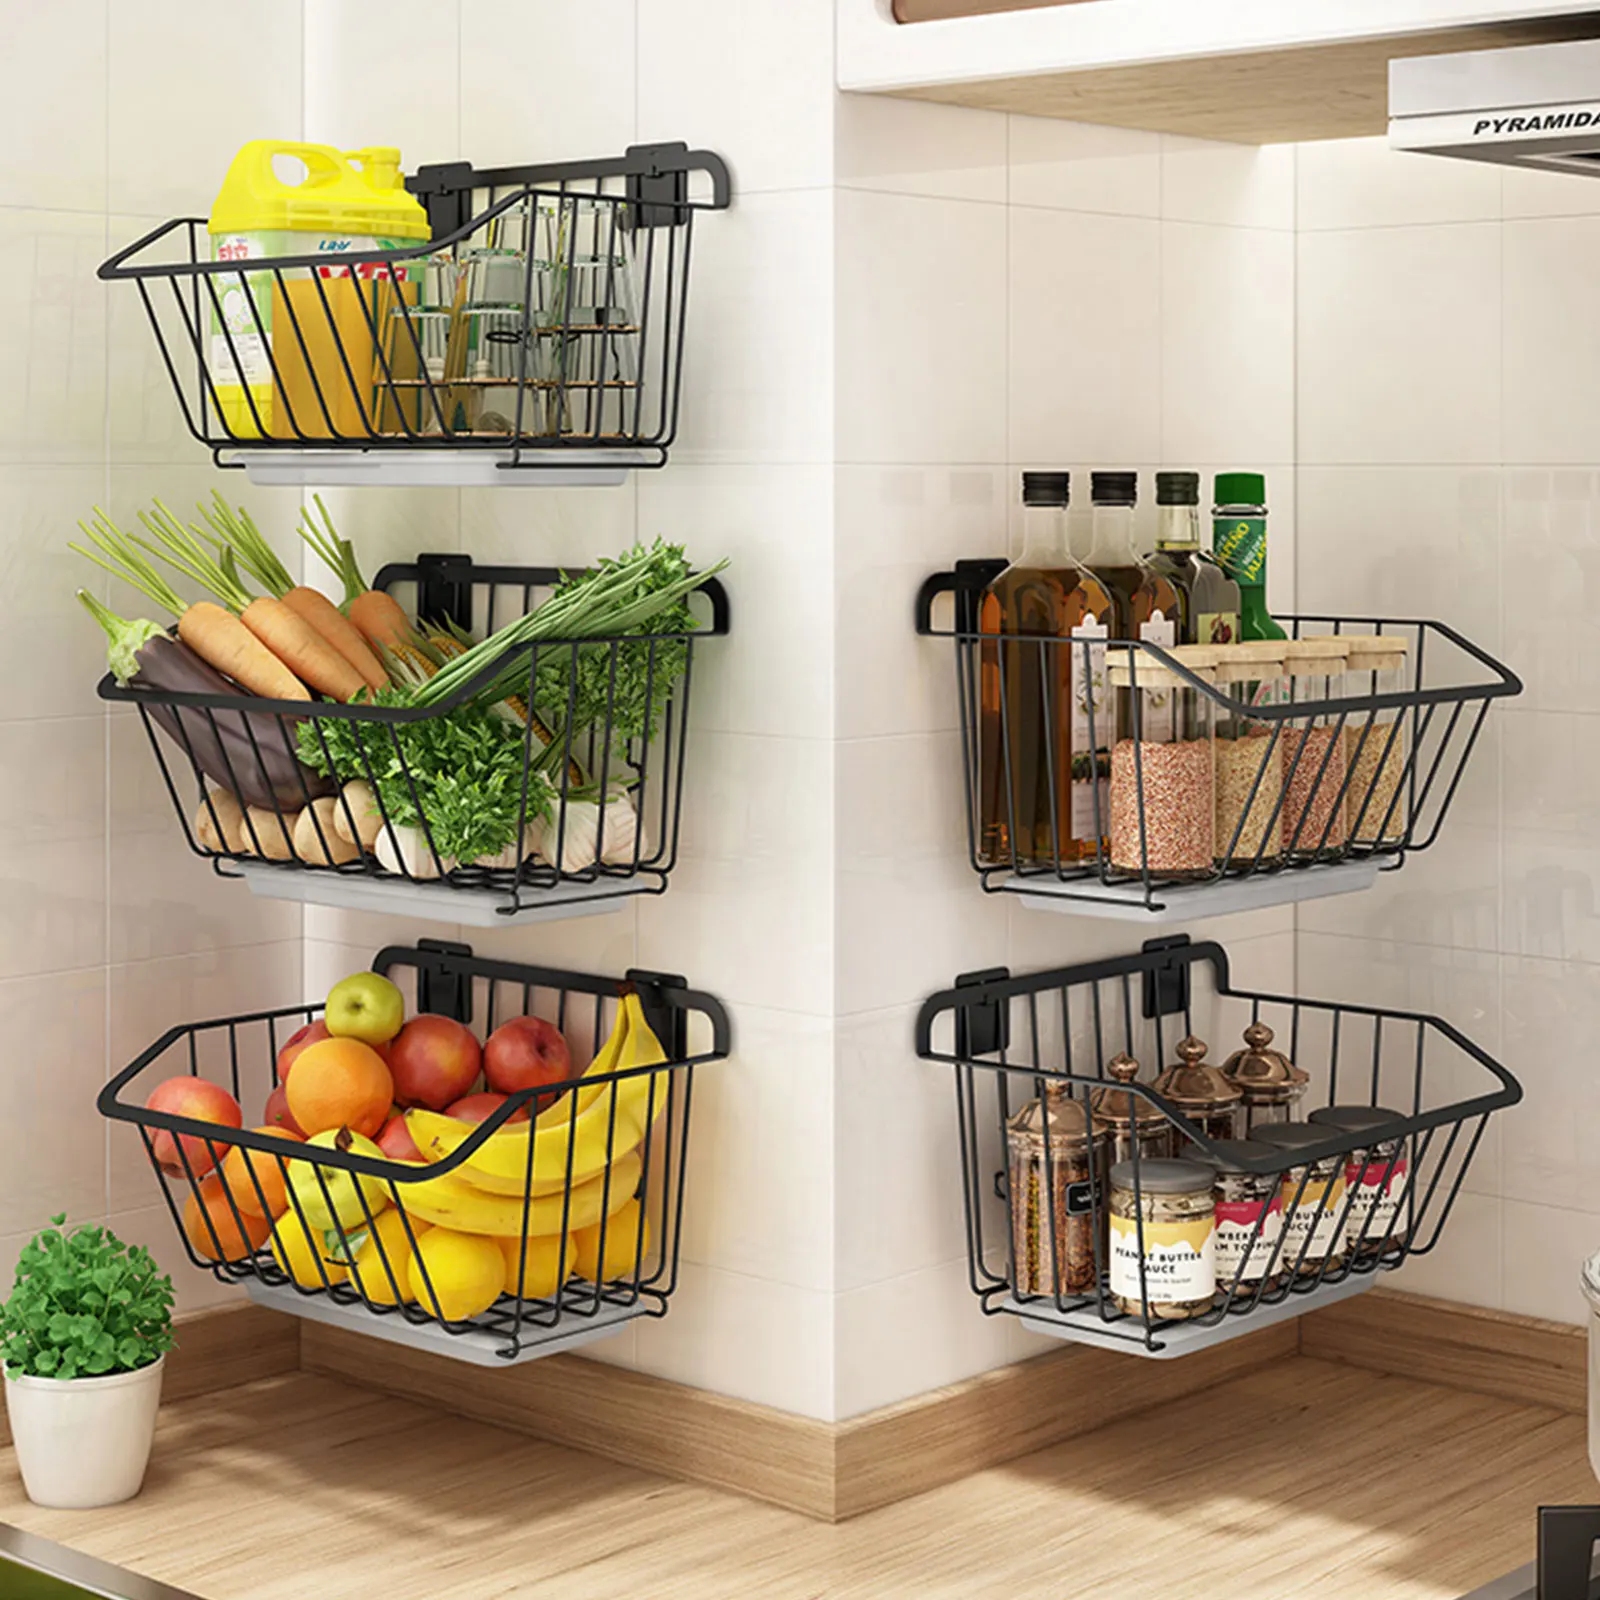 

Stainless Steel Kitchen Wall Hanging Storage Basket Spice Rack Fruit Vegetables with Drain Organizer Dish Drying Shelf Container